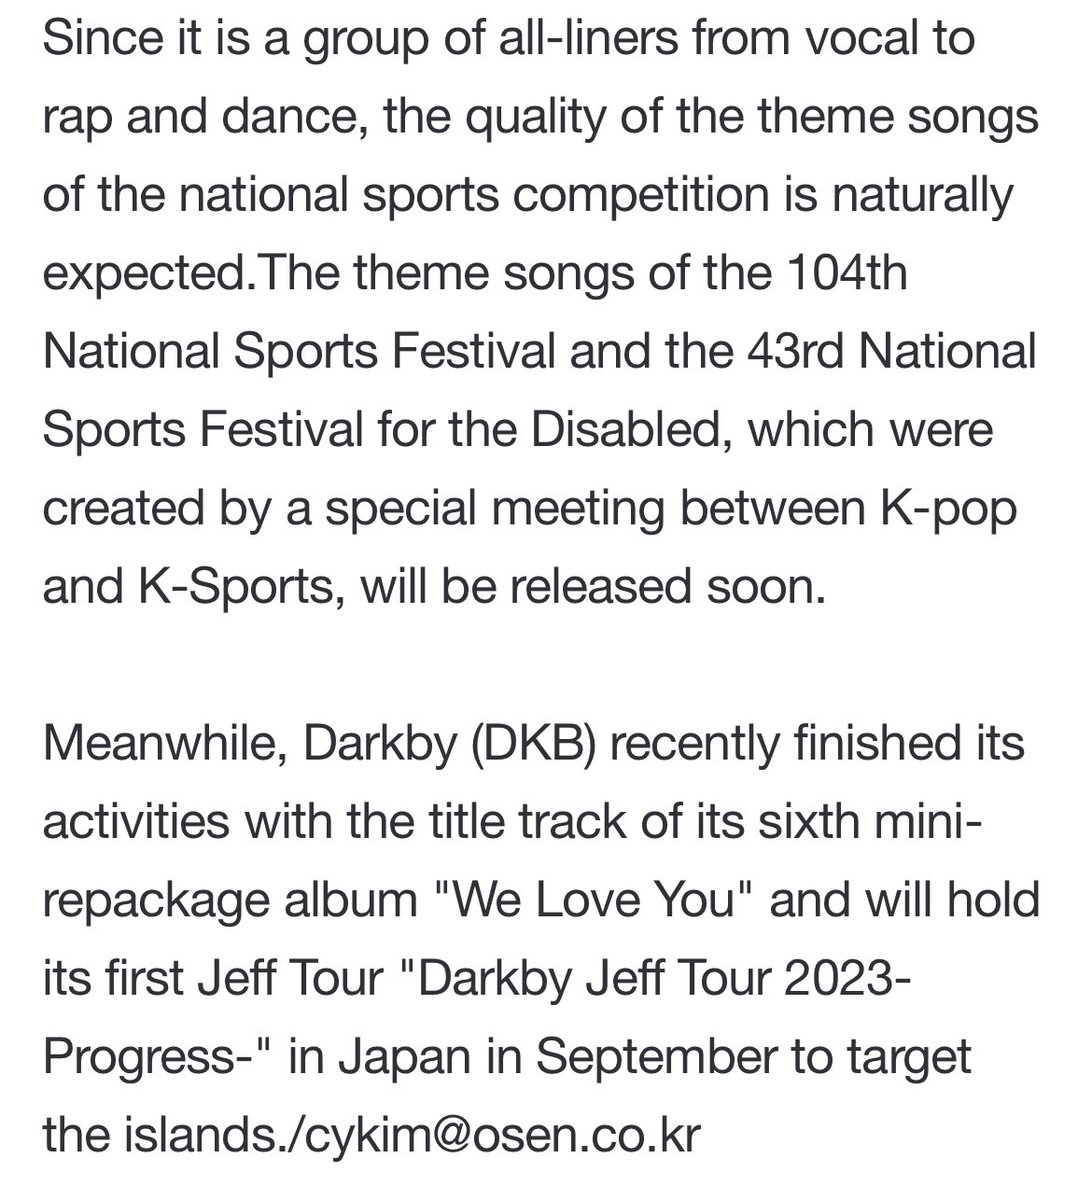 🚨📢 DKB recorded the theme song for the 104th National Sports Festival and the 43rd National Sports Festival for the Disabled 😮 This festival will be held at more than 70 stadiums from October 13-19 This is so cool, I’m so proud of our boys 🥹❤️ #DKB #다크비 link below